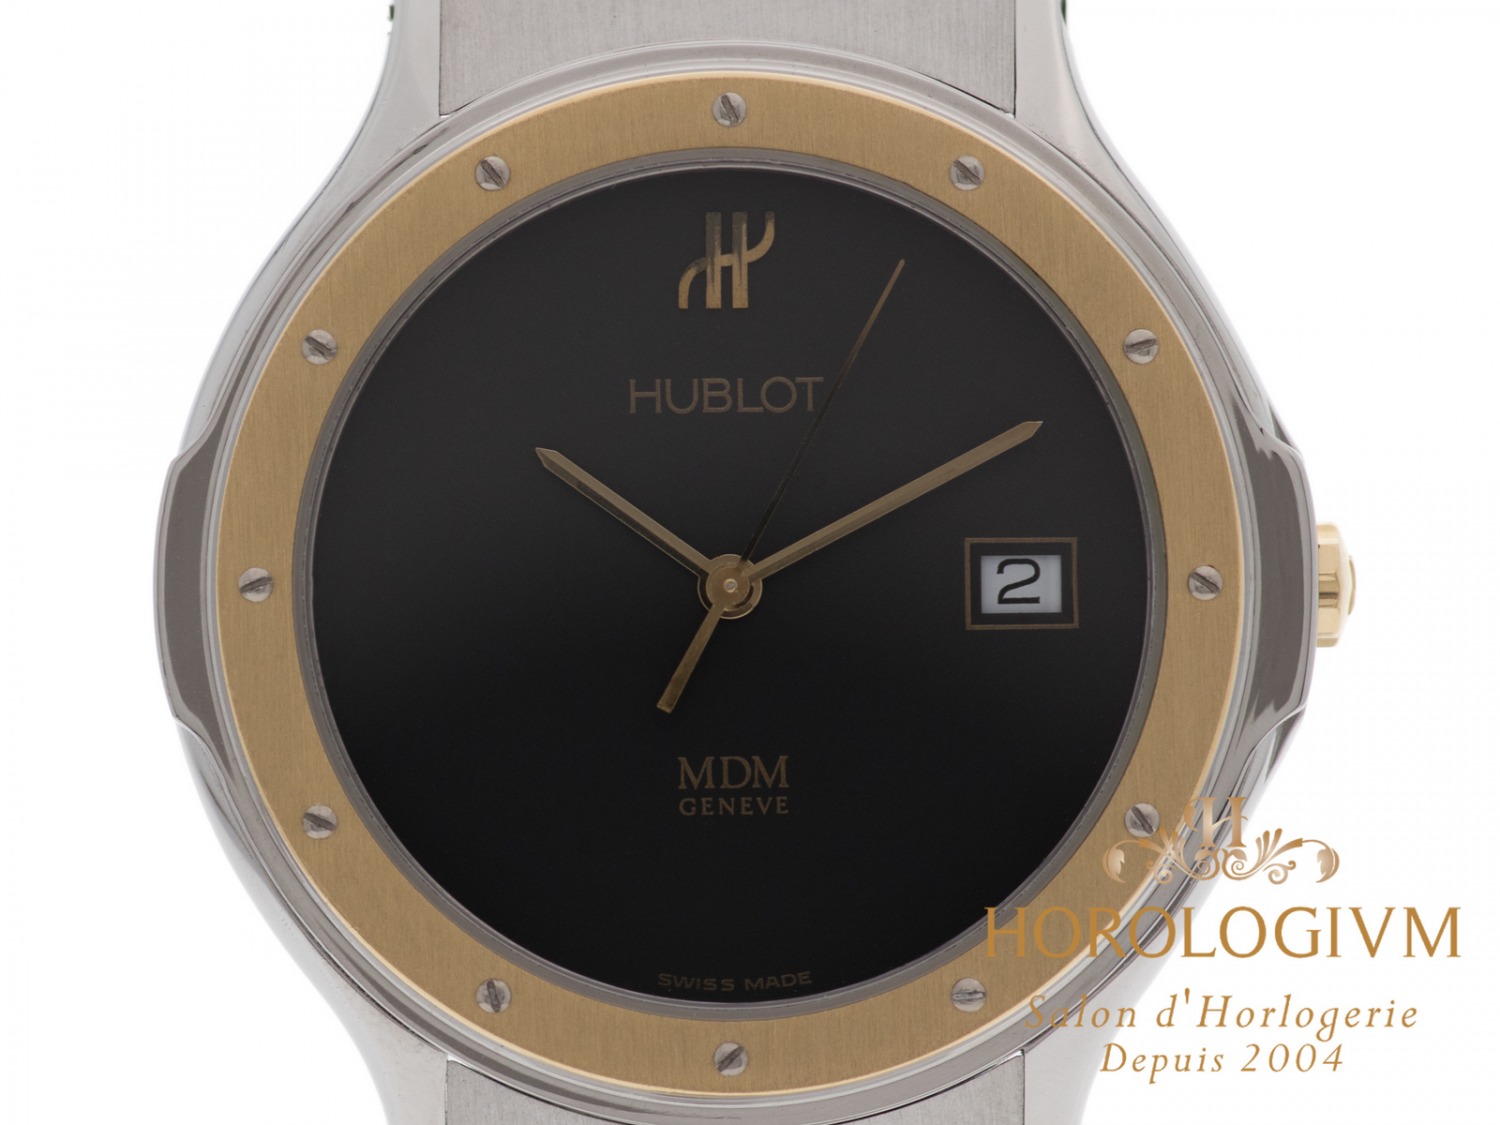 Hublot MDM TowTone 36 MM watch, two-tone (bi-colored) silver (case) and yellow gold (bezel)